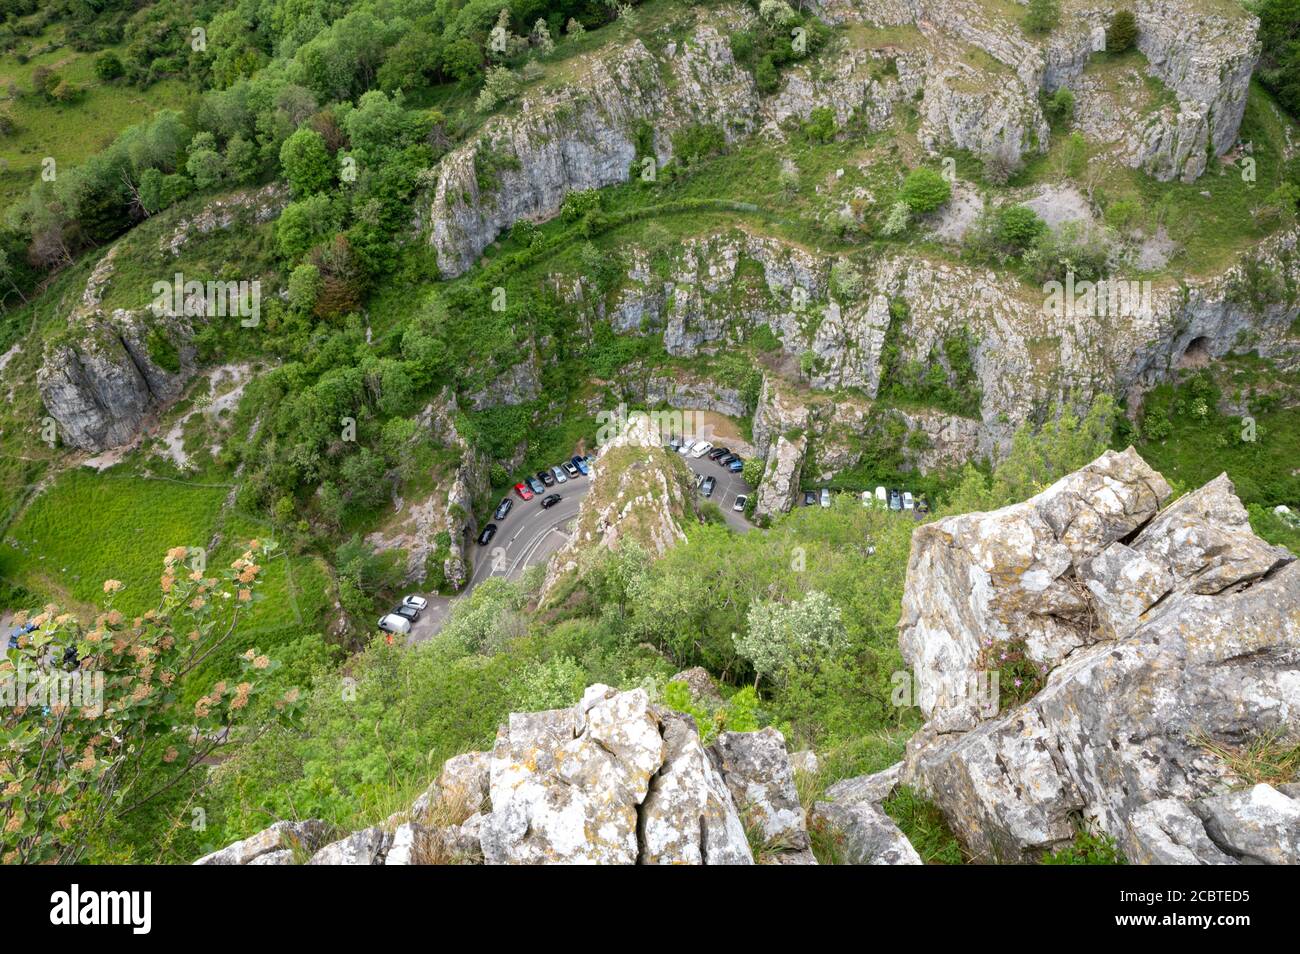 Cliffs of Cheddar Gorge from high viewpoint. High limestone cliffs in canyon in Mendip Hills in Somerset, England, UK Stock Photo